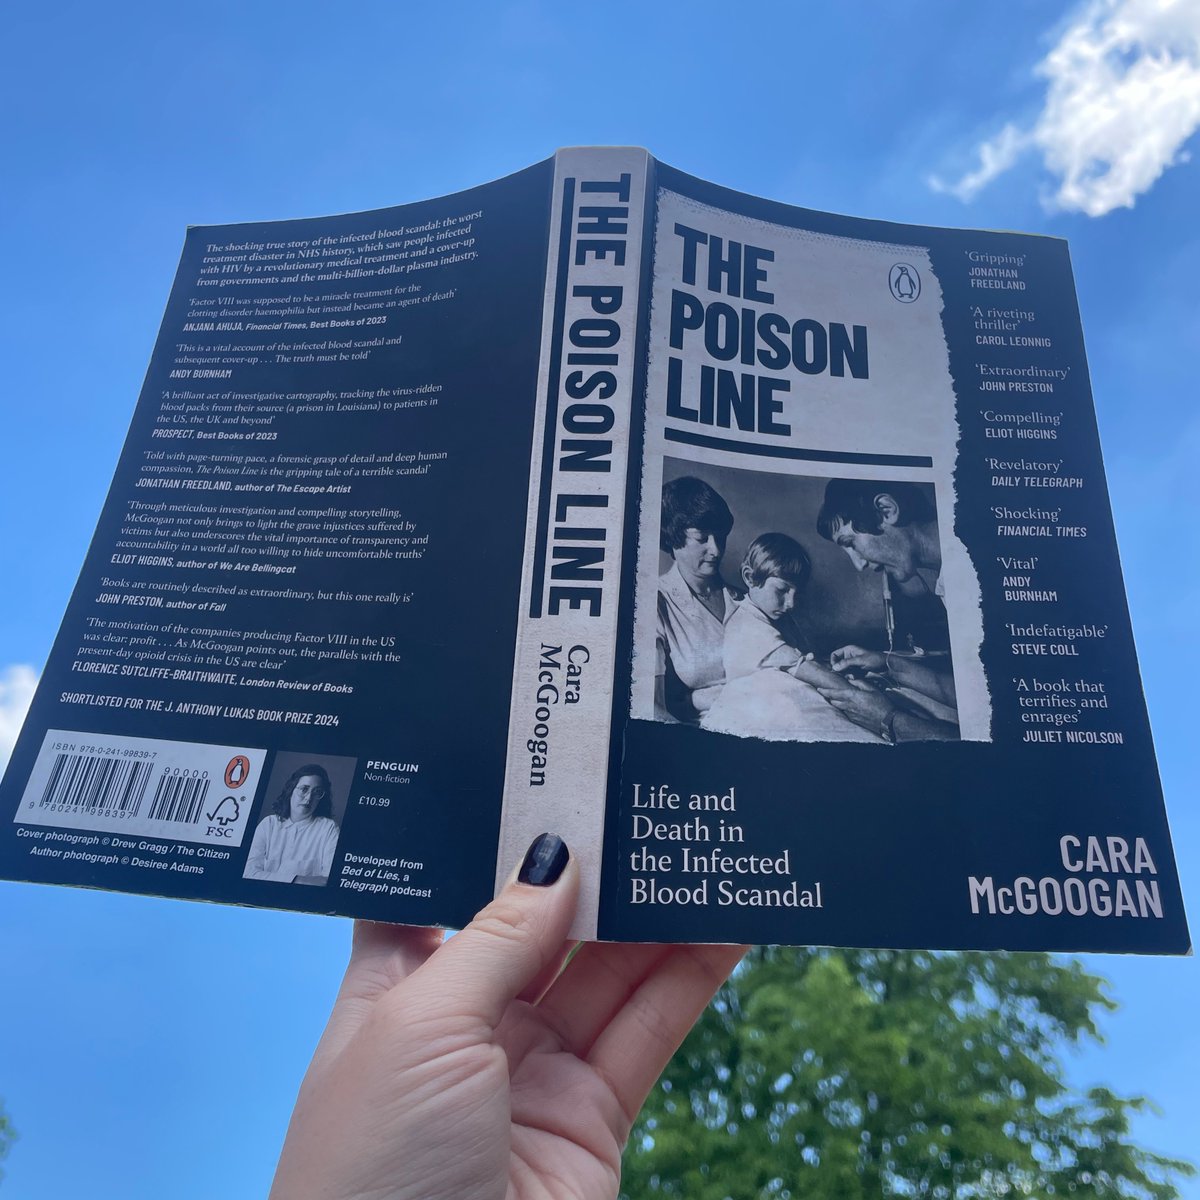 The Poison Line: Life and Death in the Infected Blood Scandal - out in paperback 2 weeks today. Four days before the inquiry’s final report. Pre-order now and get up to speed! 🙏 amazon.co.uk/gp/aw/d/024199…